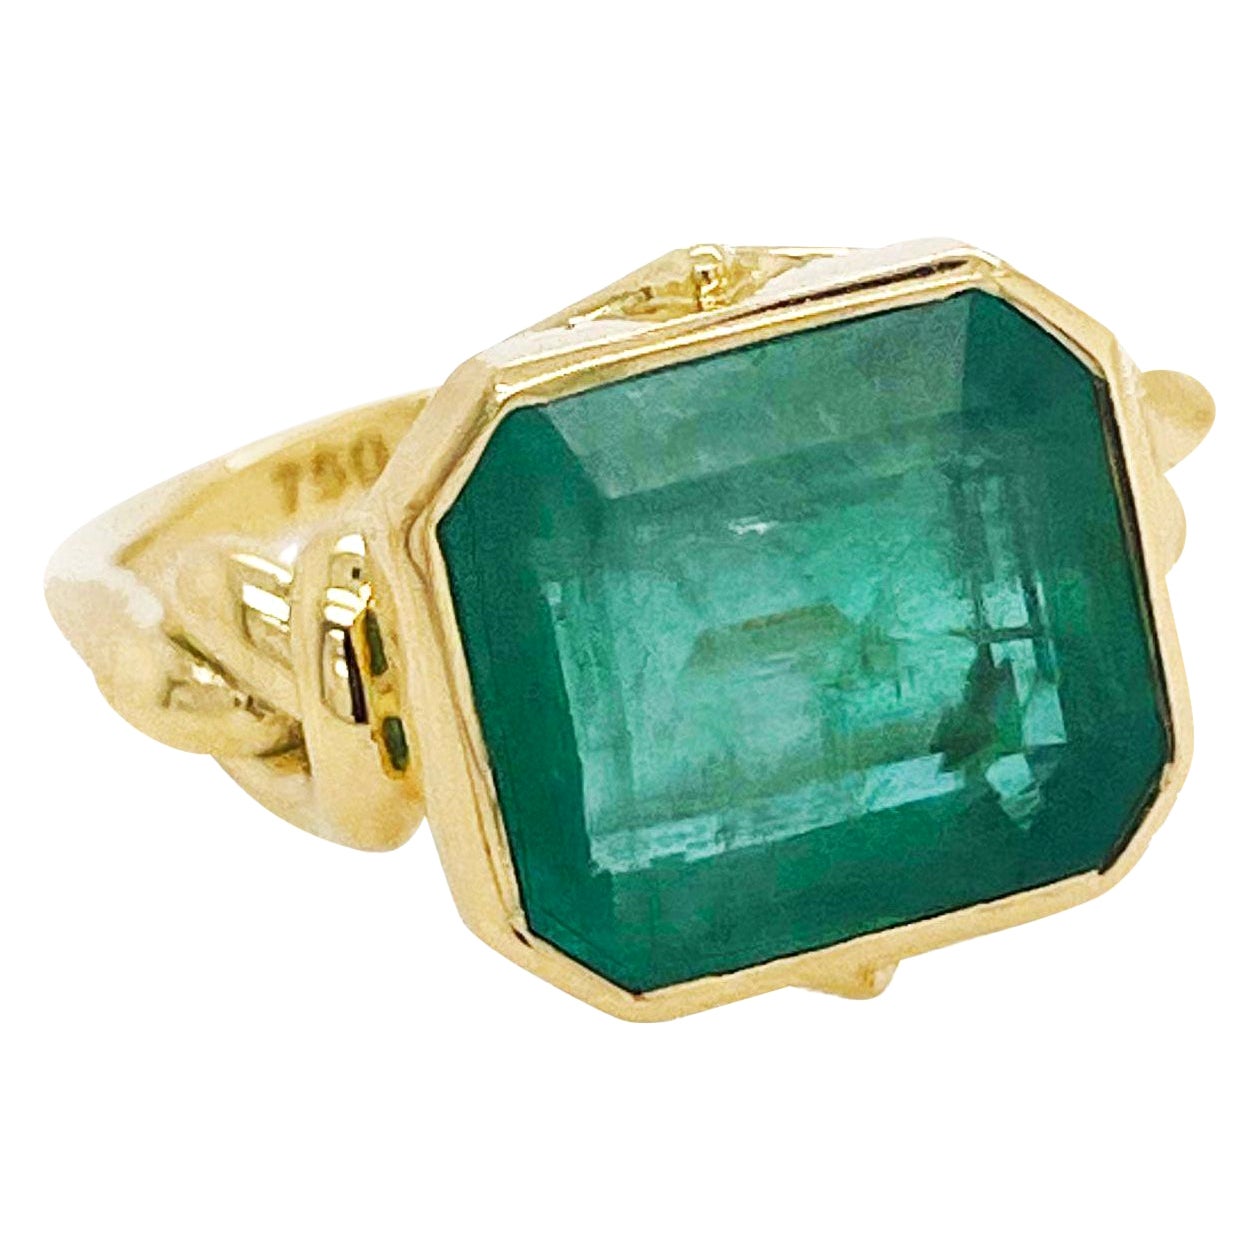 Custom made * 

Forget me knot style ring featuring a natural 6ct Zambian emerald set in 18ct yellow gold

Made to order to your finger size contact our designer to hand select your emerald.